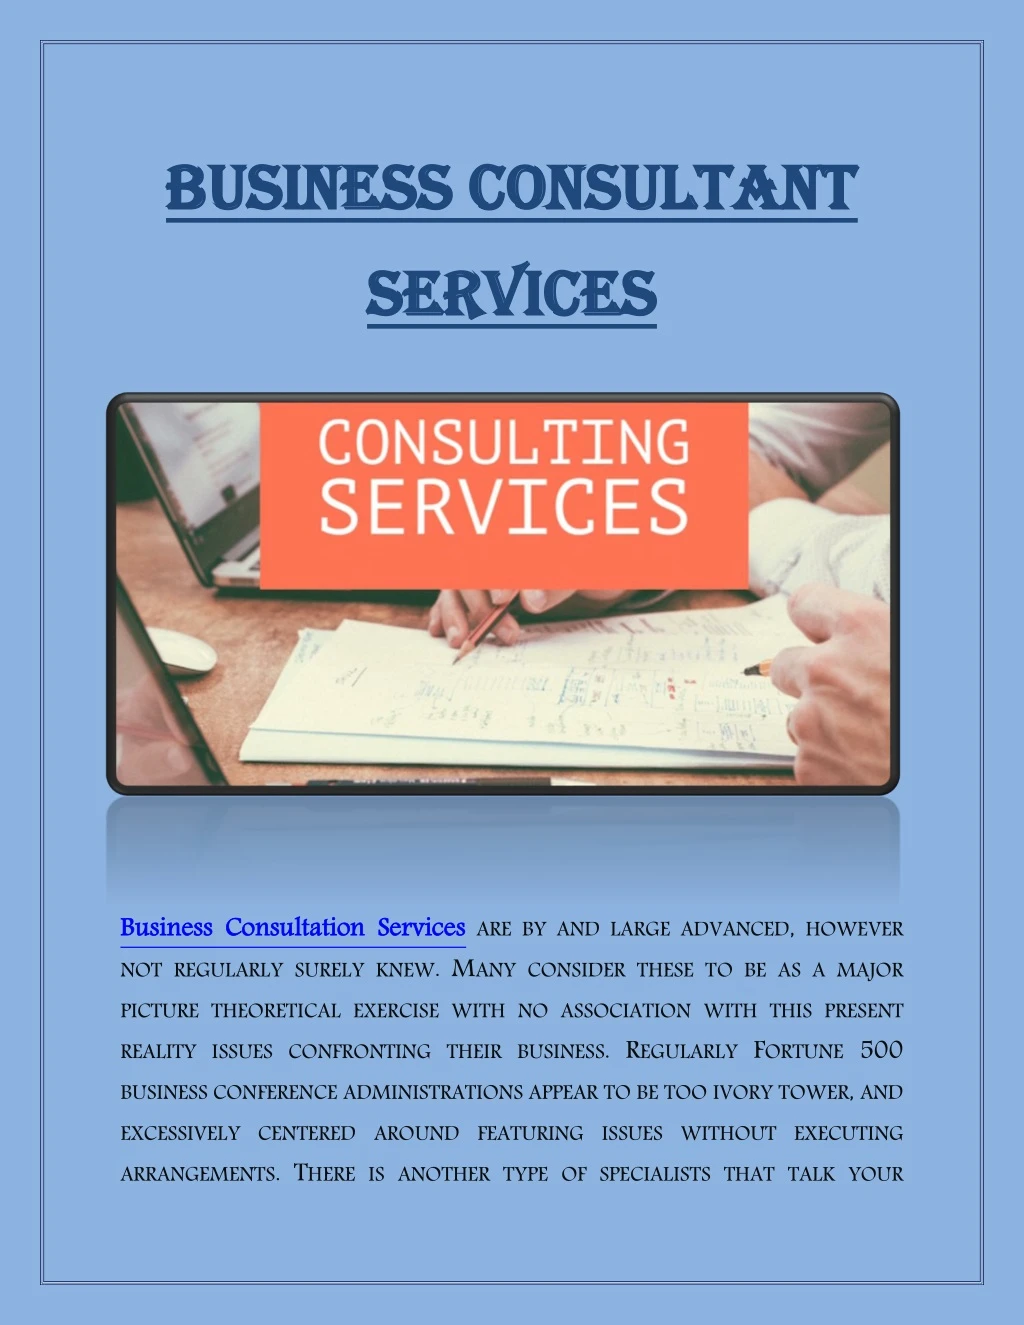 business c business consultant onsultant services